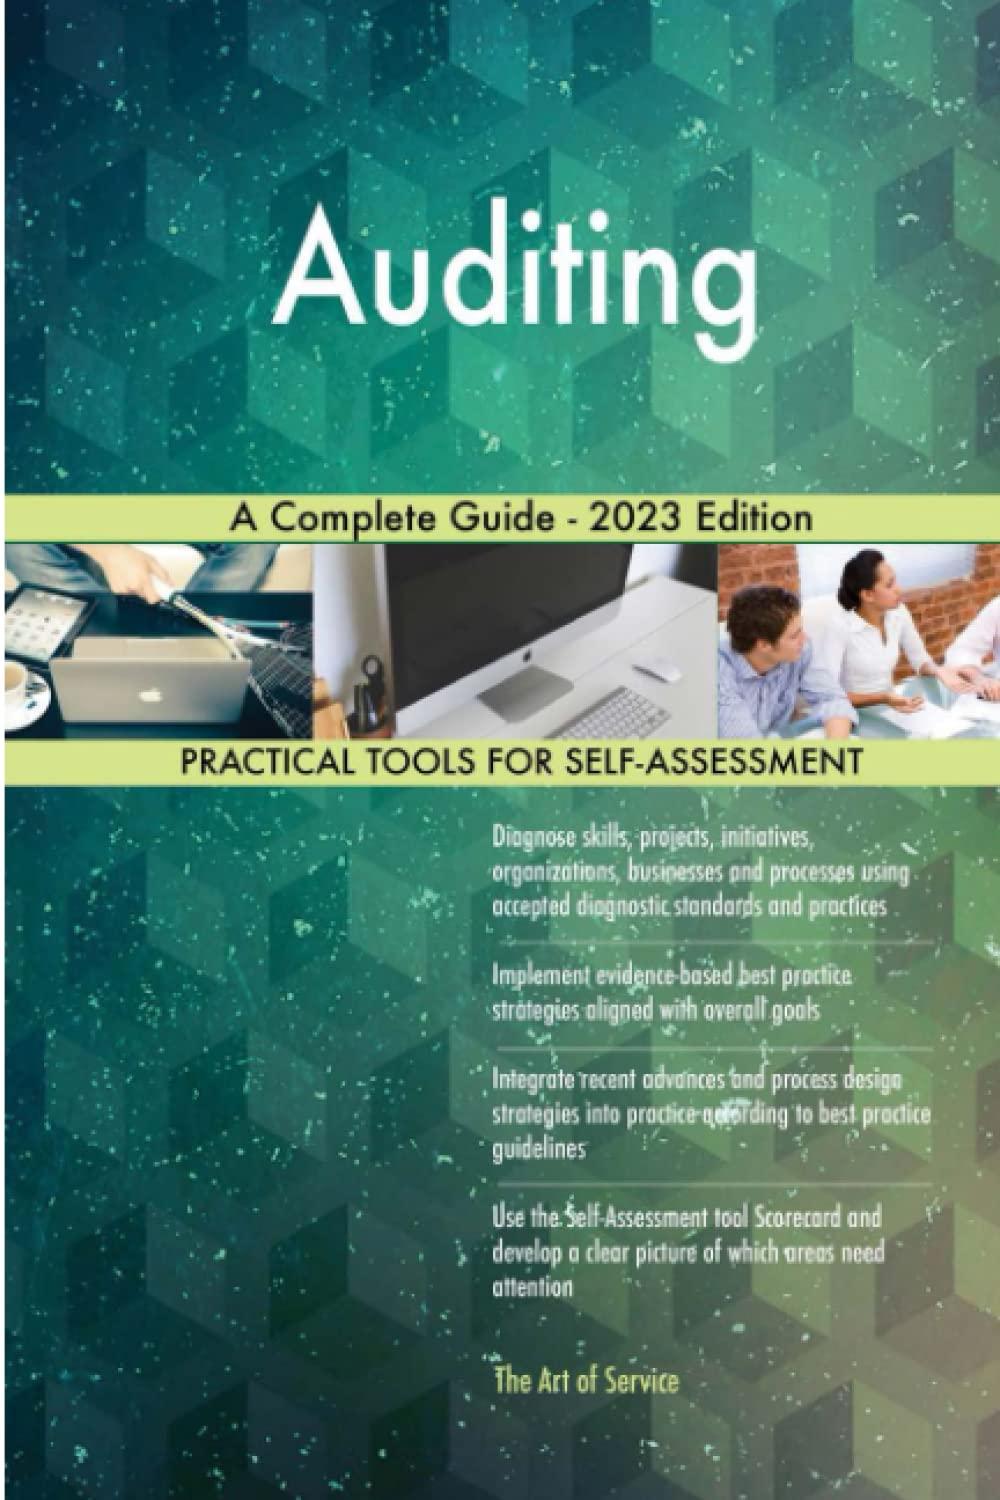 auditing a complete guide 2023rd edition gerardus blokdyk 1038805538, 978-1038805539